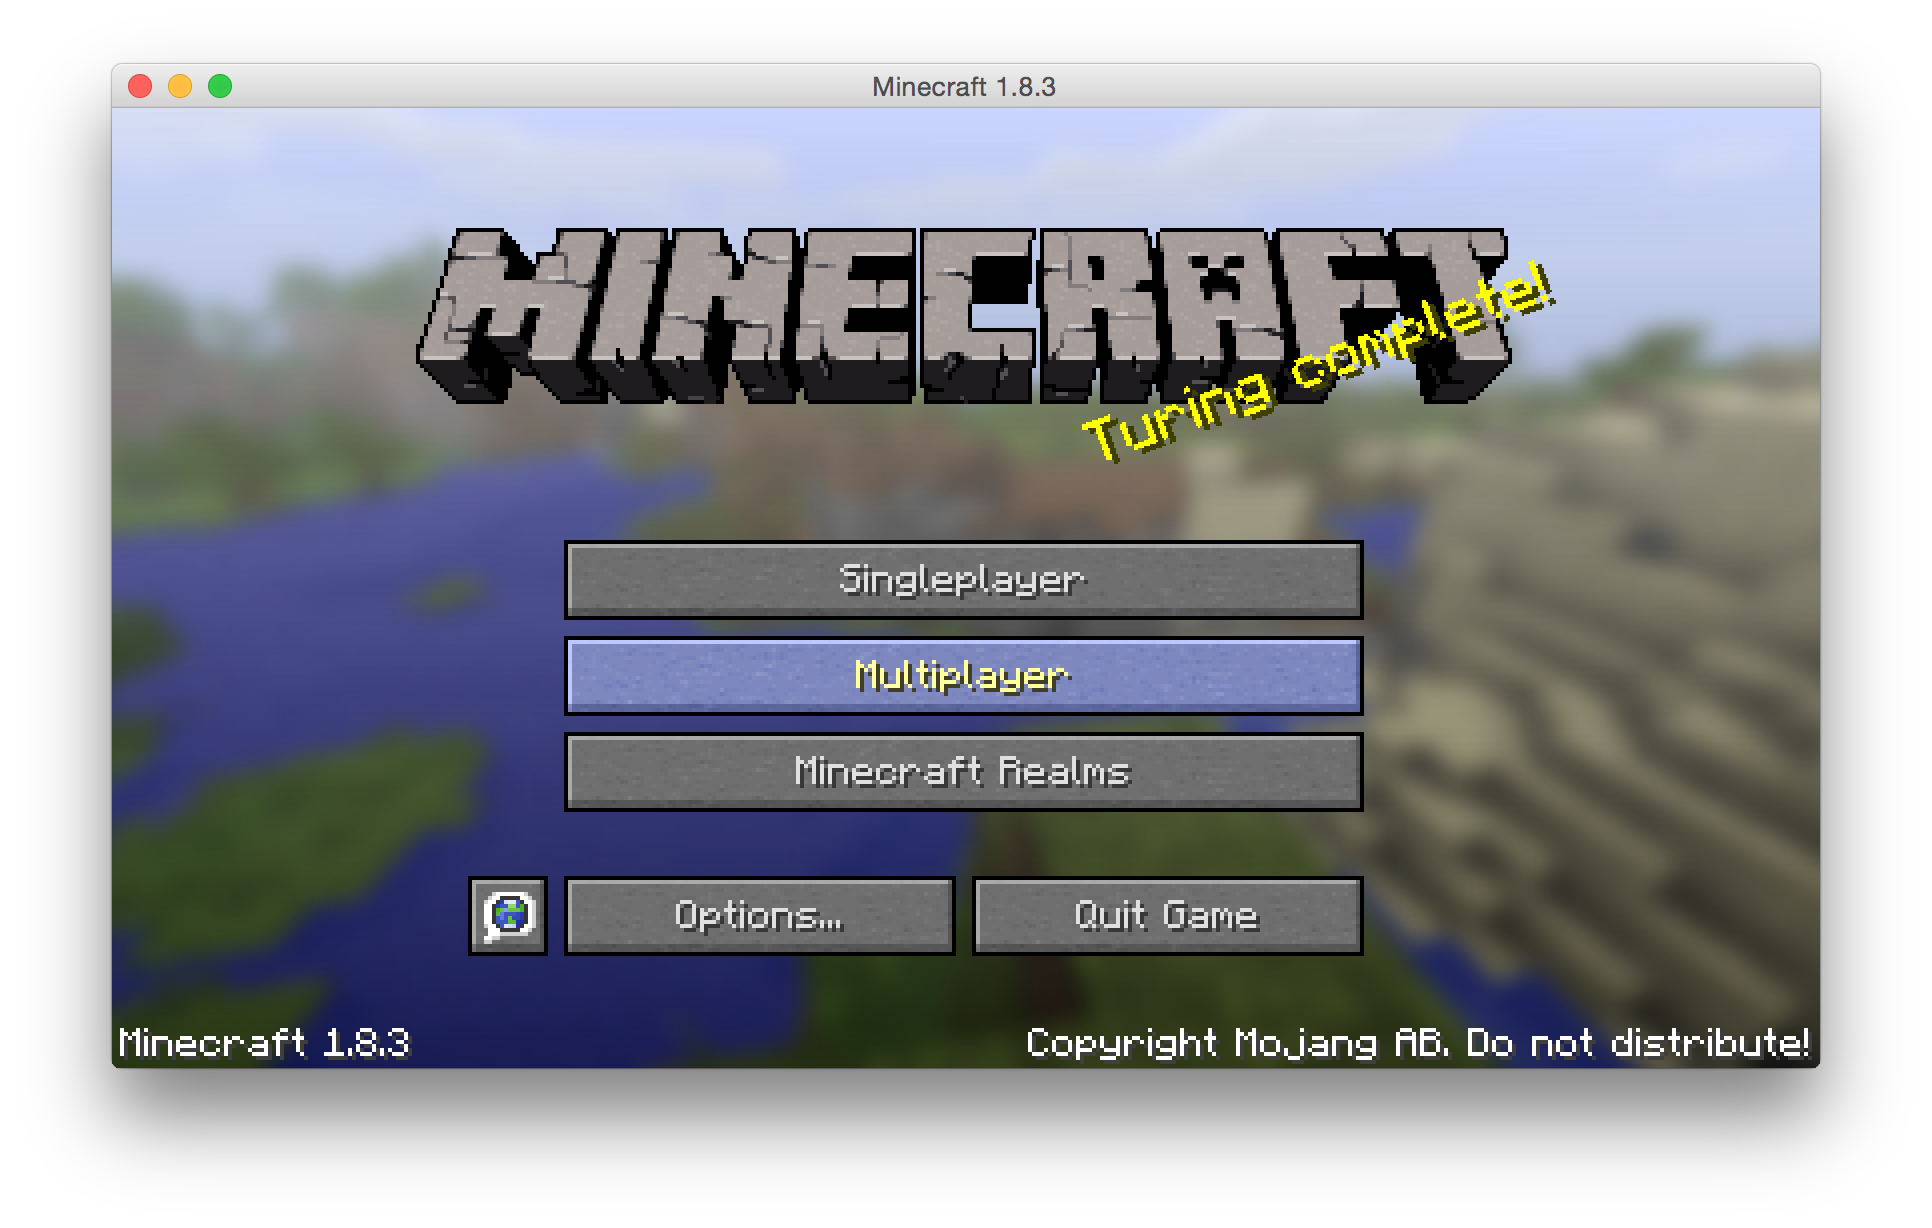 play store account with minecraft